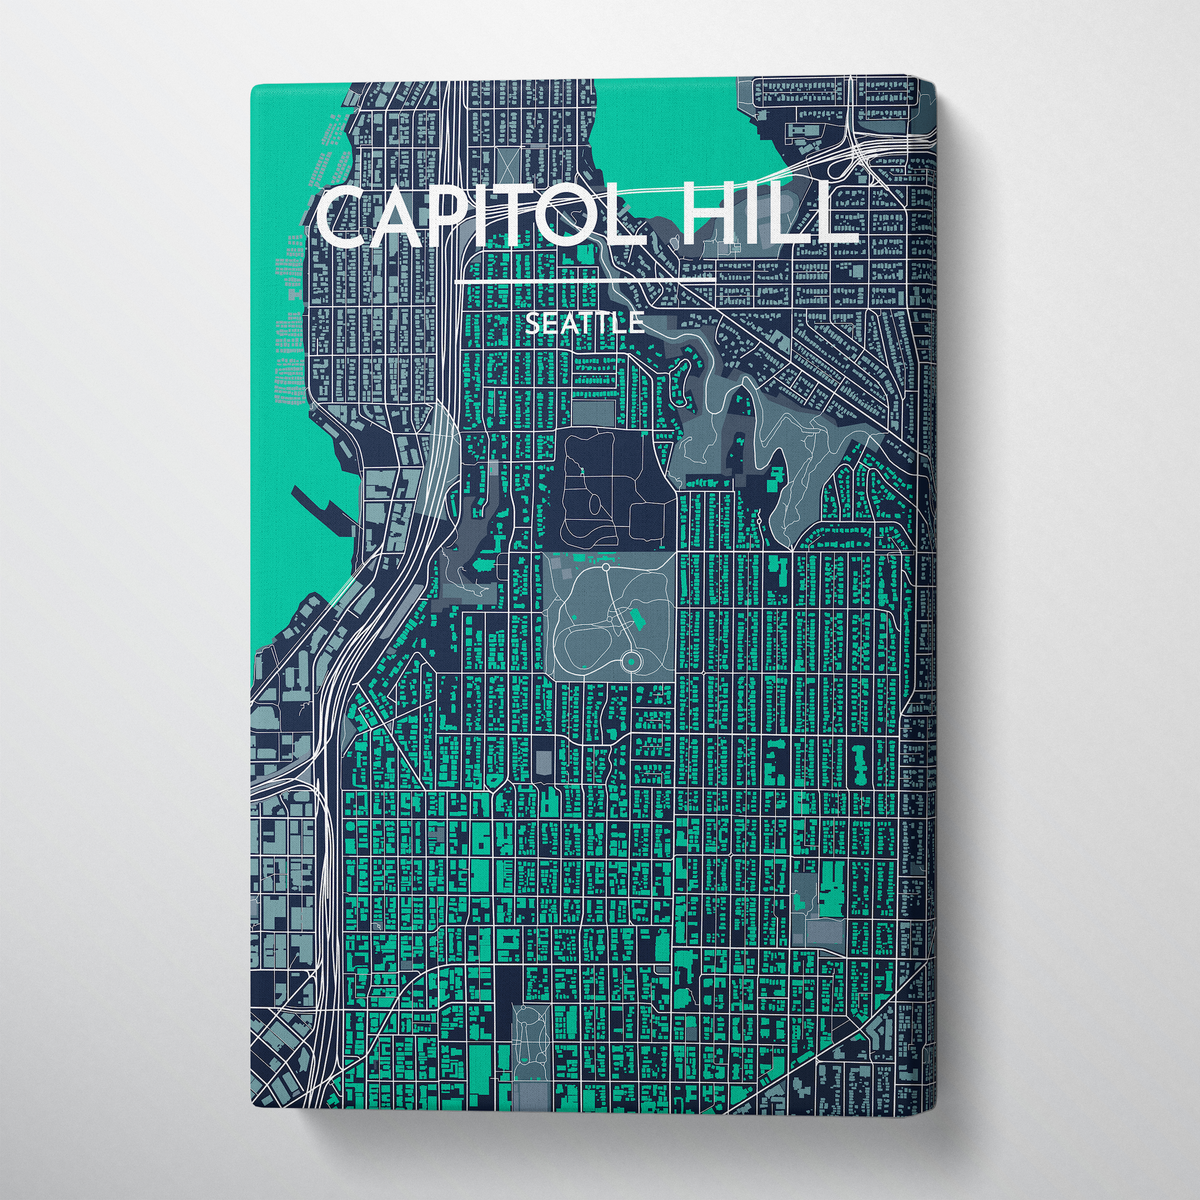 Seattle Capitol Hill Neighbourhood City Map Canvas Wrap - Point Two Design